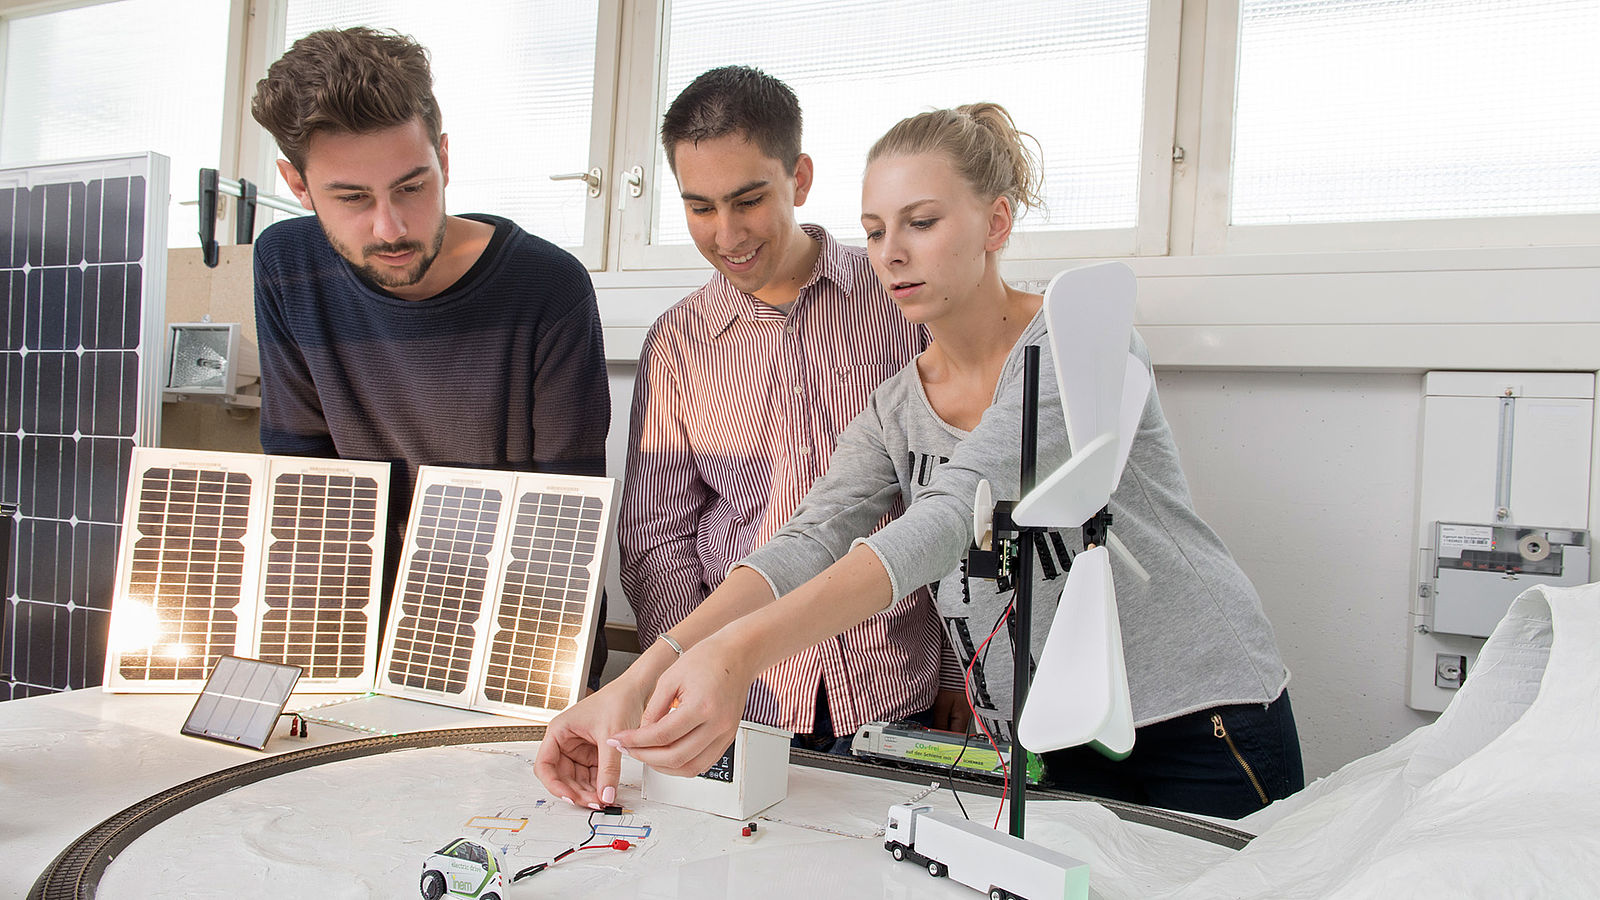 NWT students at Esslingen University of Applied Sciences work on building a model.